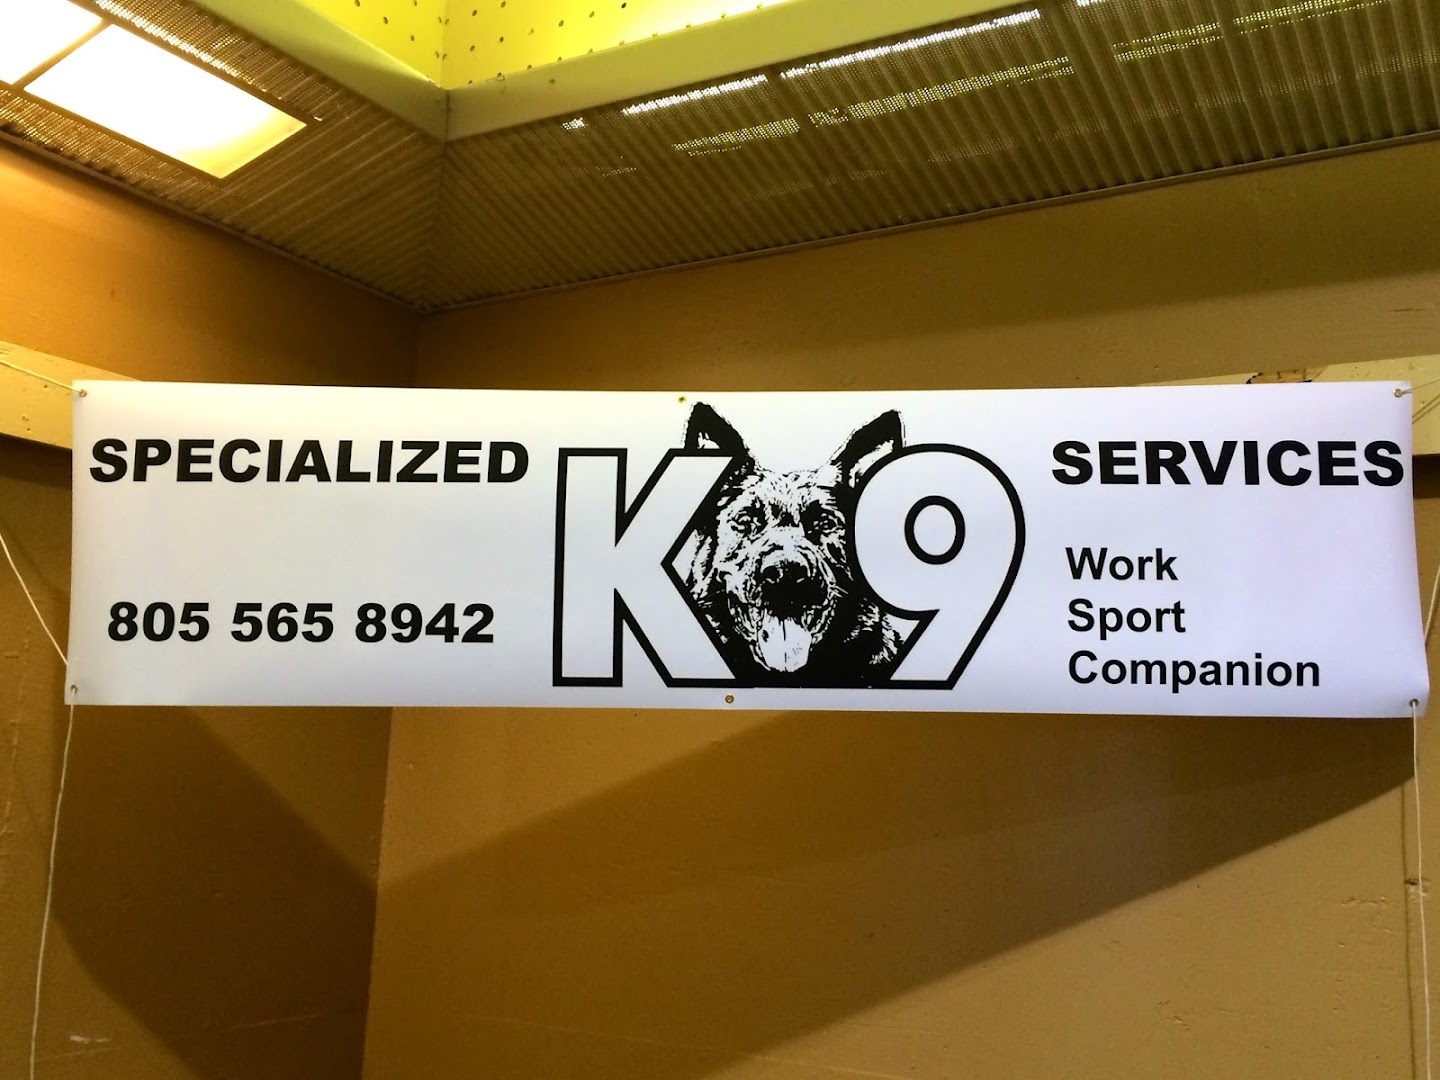 Specialized K-9 Services